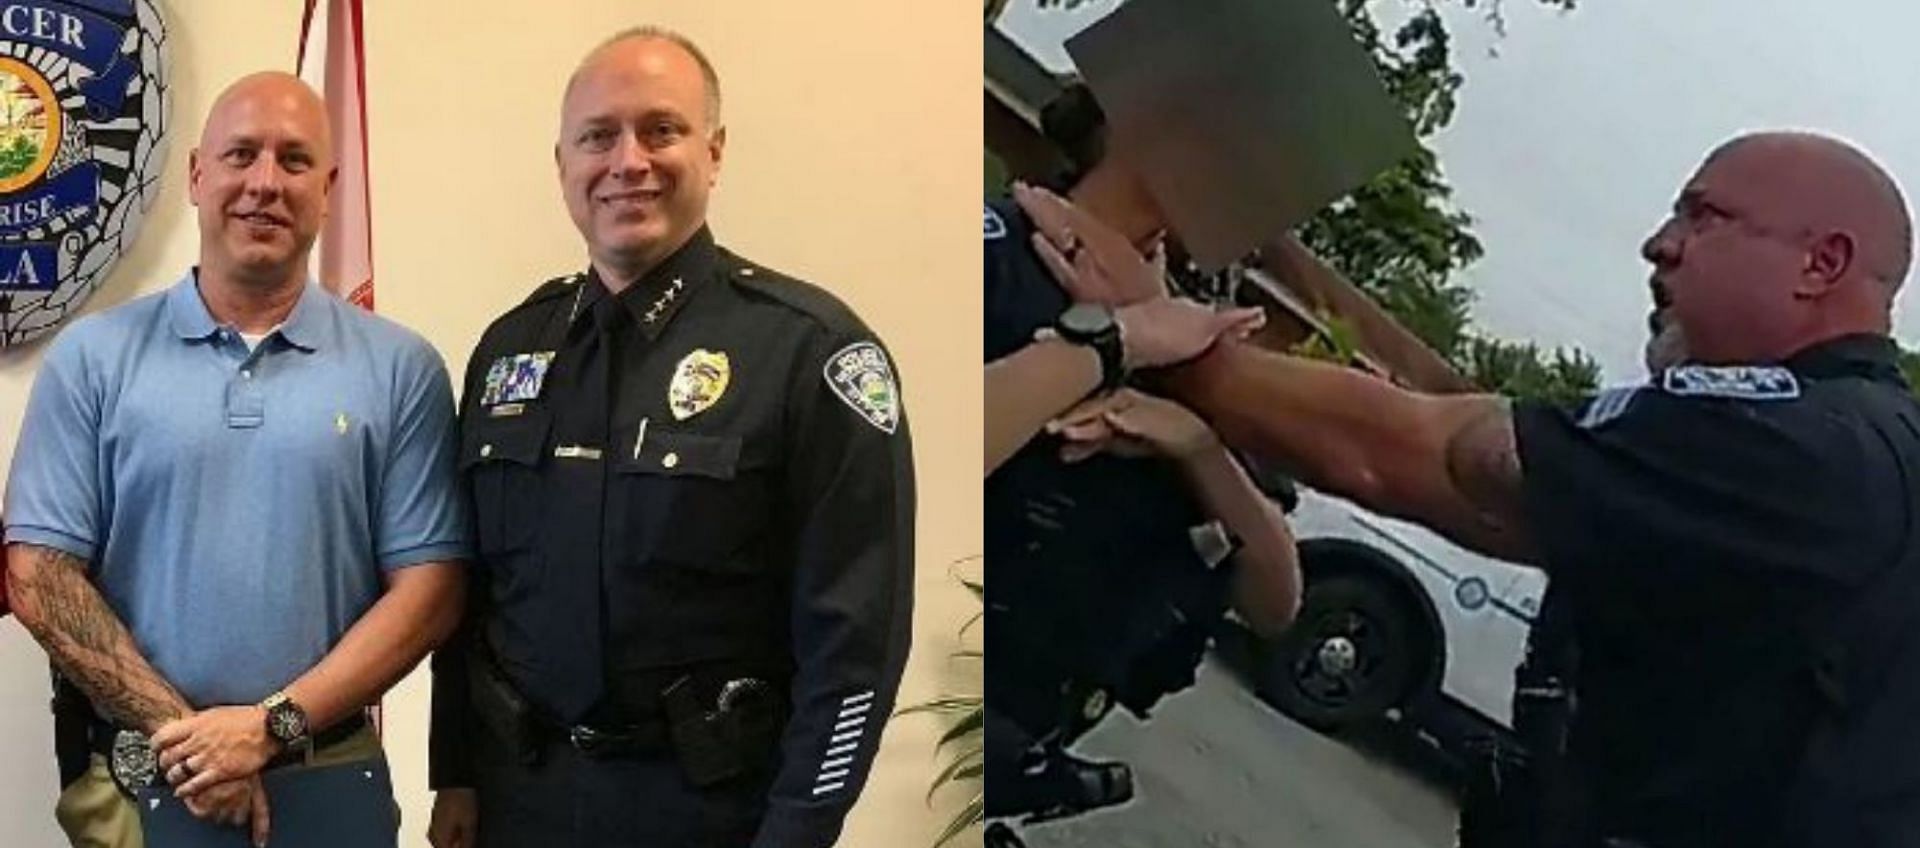 Sergeant Christopher Pullease has been relieved of his supervisory duties for choking a fellow officer (Image via City of Sunrise Police Department)